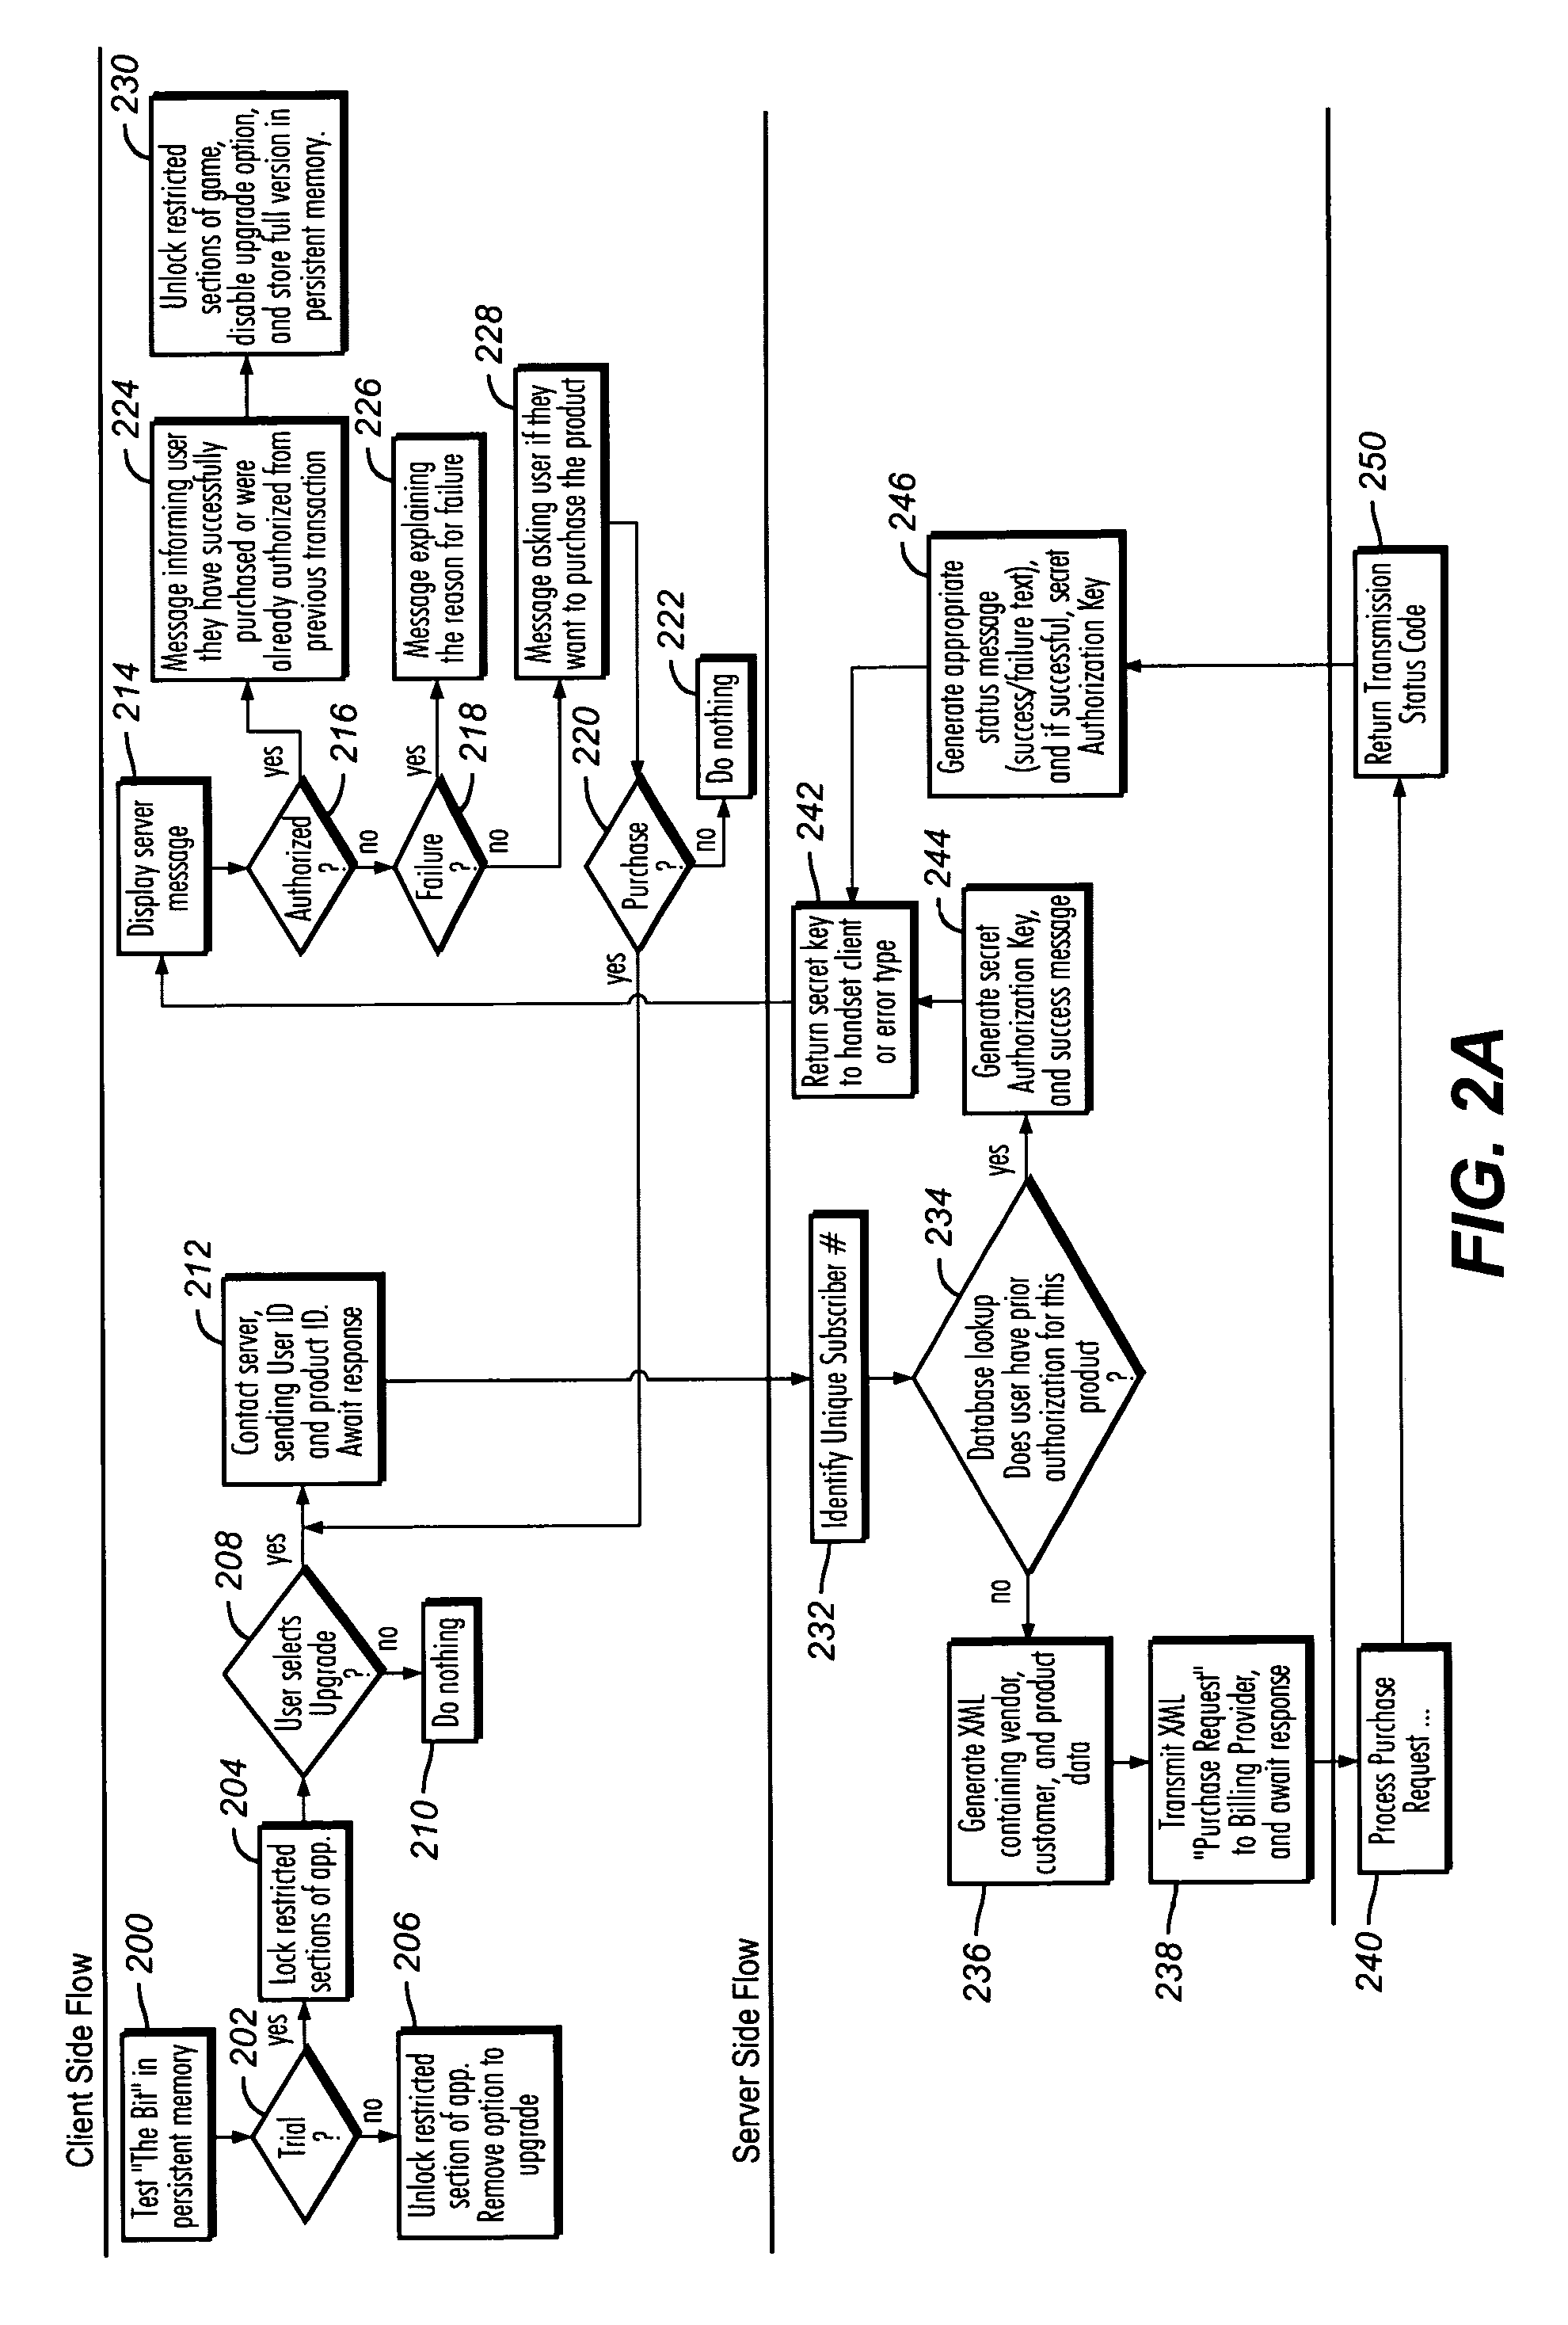 Method and apparatus for a one click upgrade for mobile applications